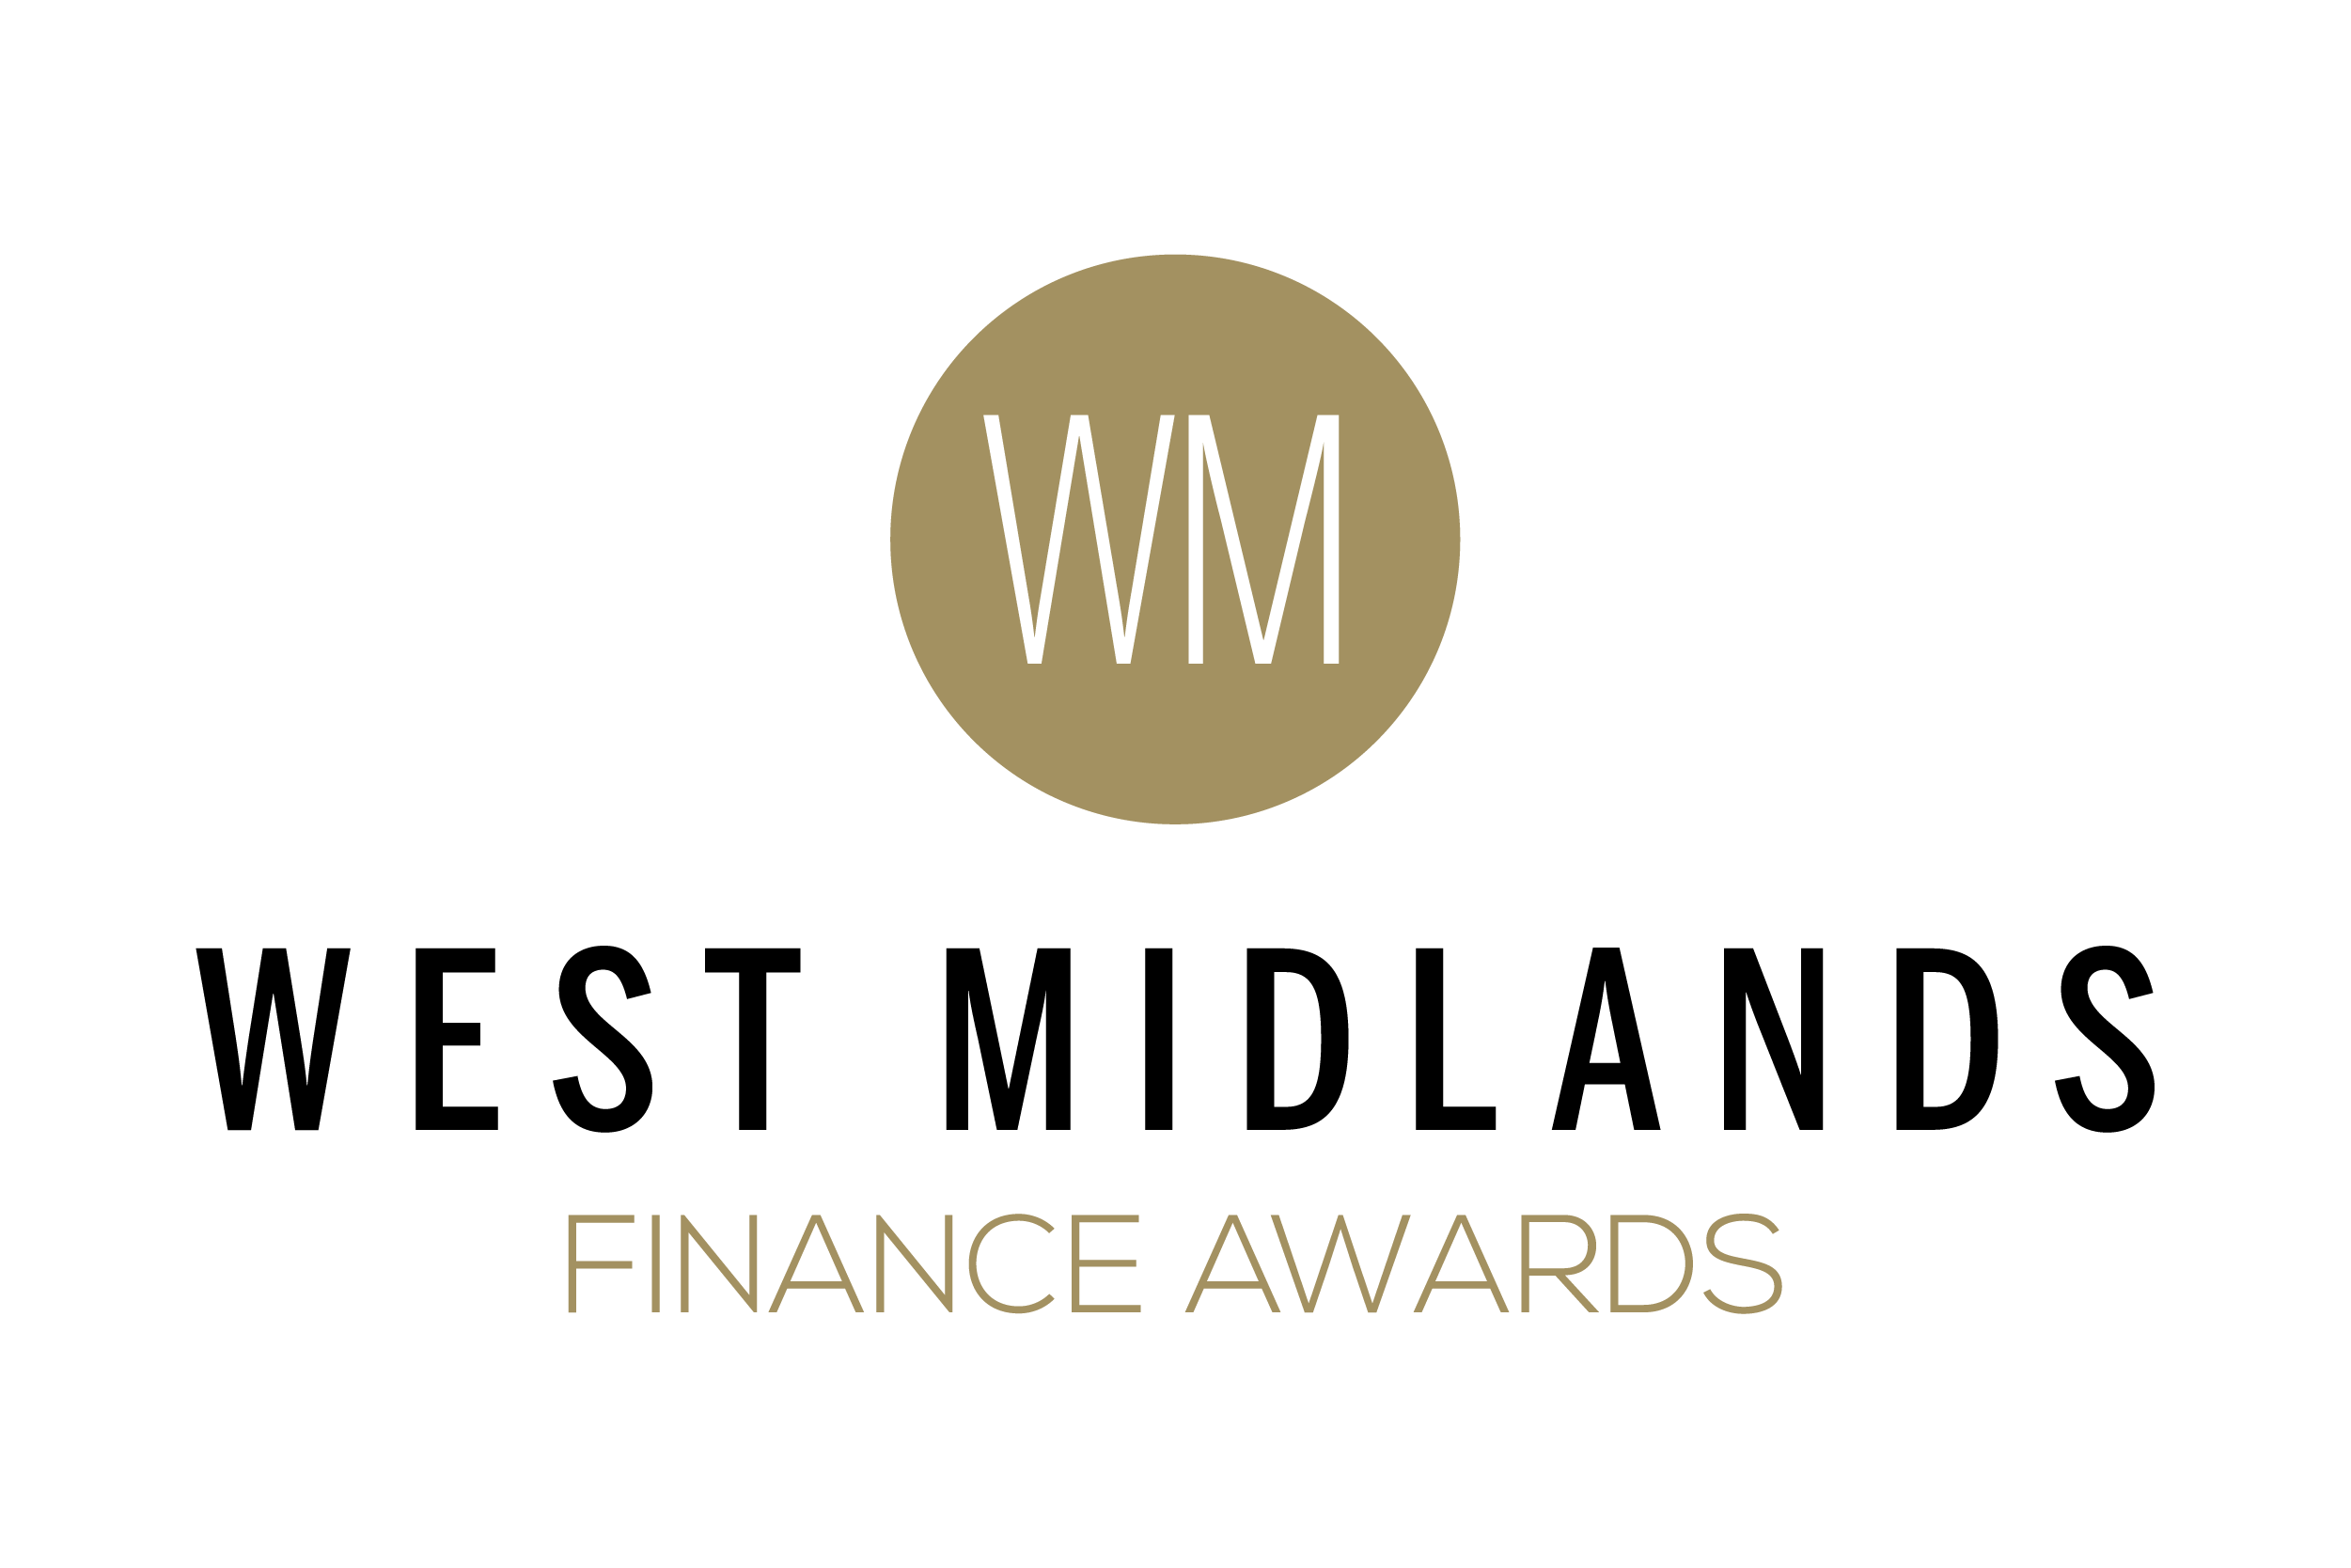 West Midlands Finance Awards writing with a black background and a gold boarder